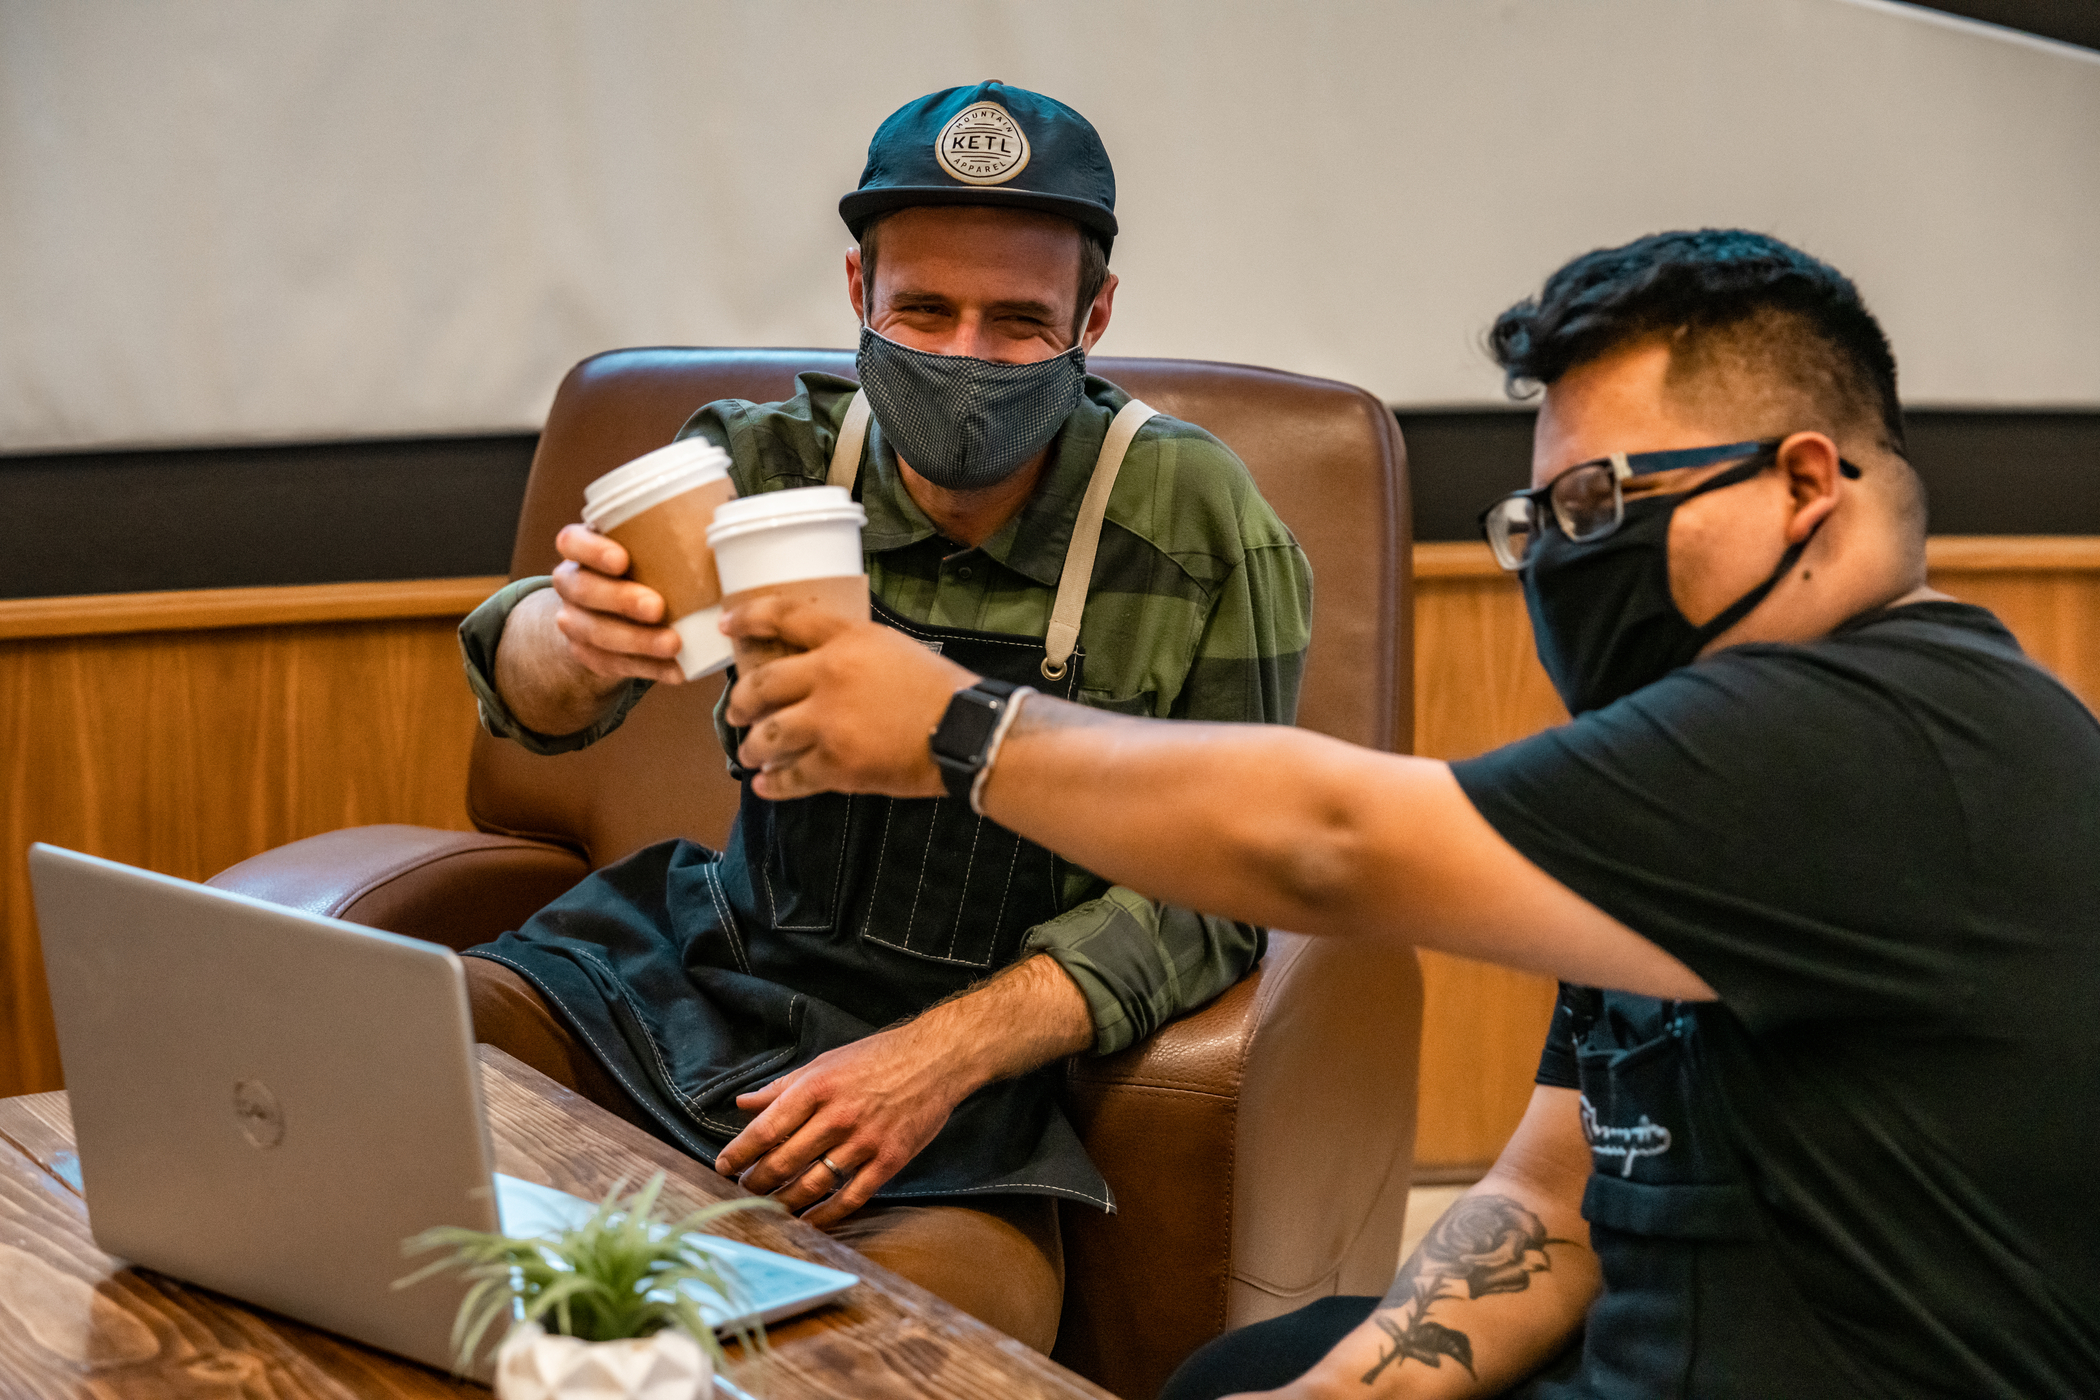 Two people are raising their coffee cups together like they are making a toast. They are both wearing face masks while sitting at a table together.